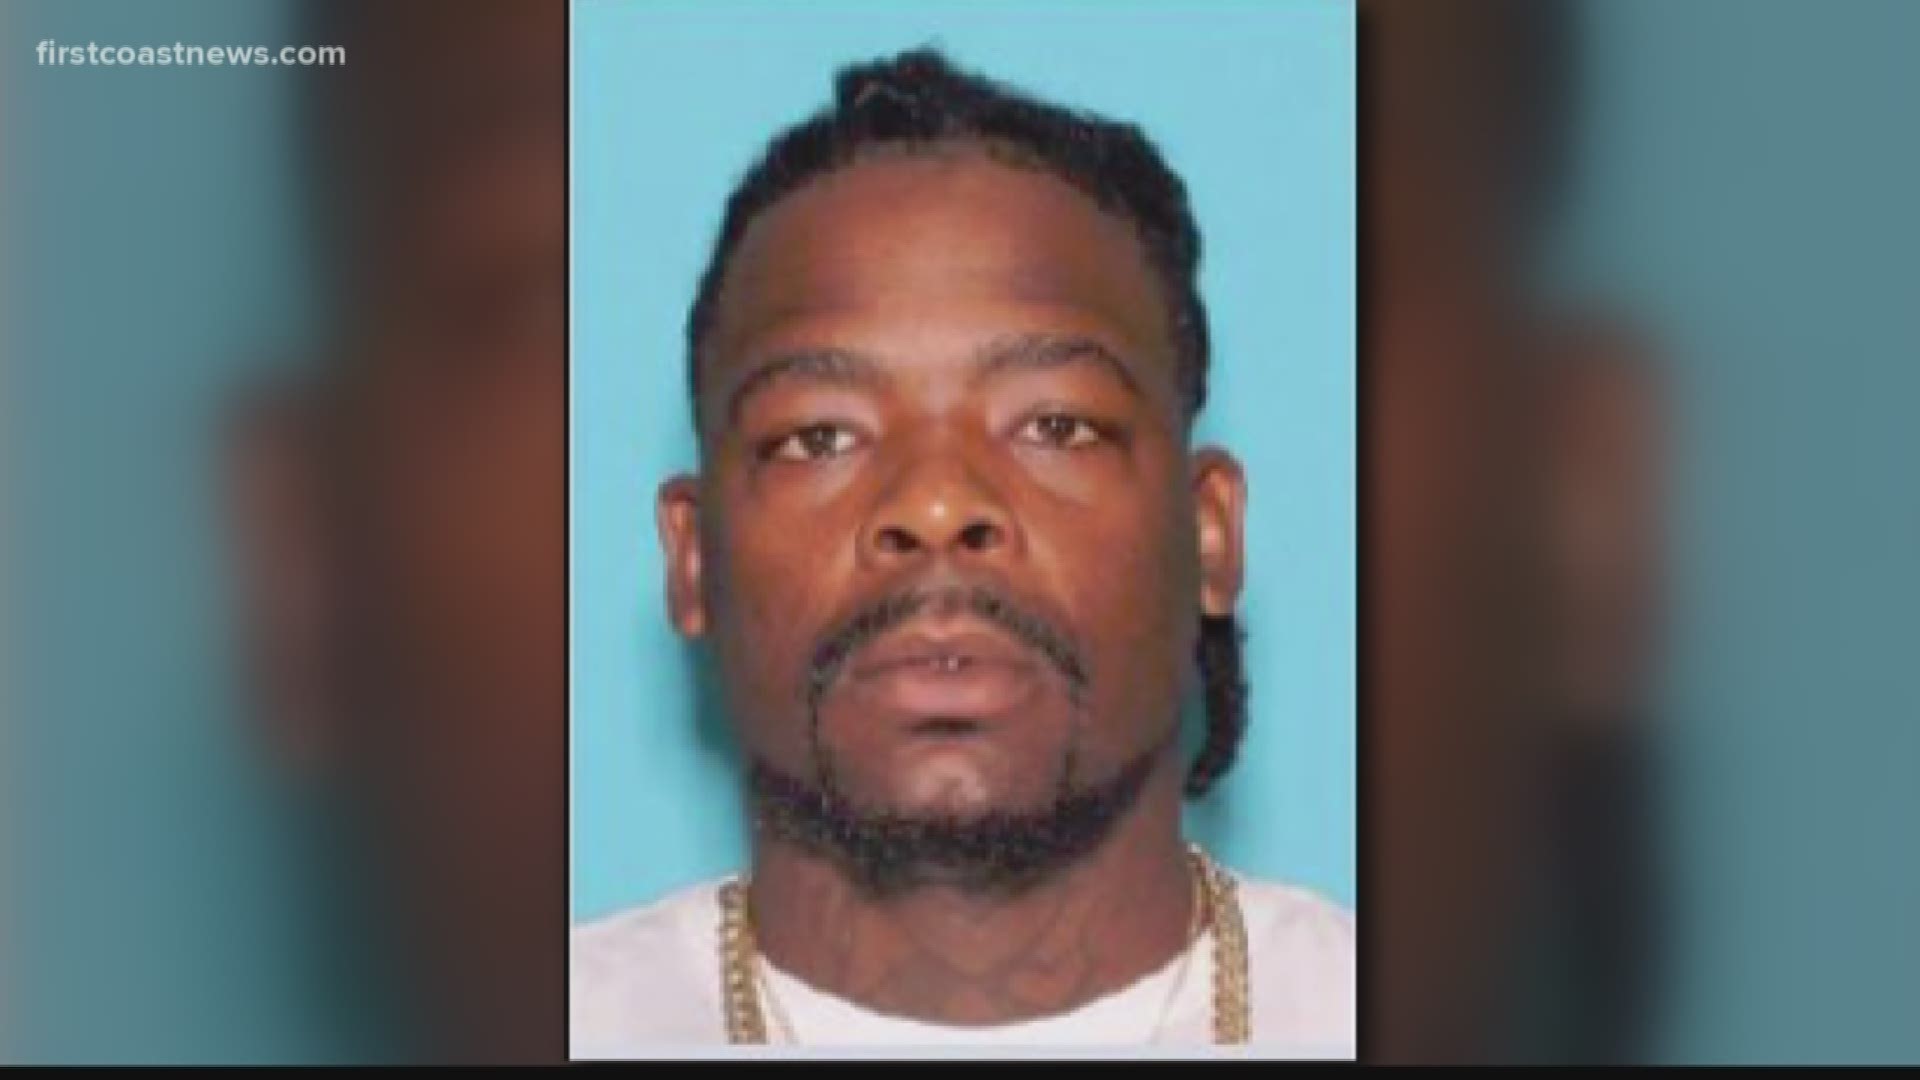 Deron Matthews is wanted for a murder which occurred earlier in the week.